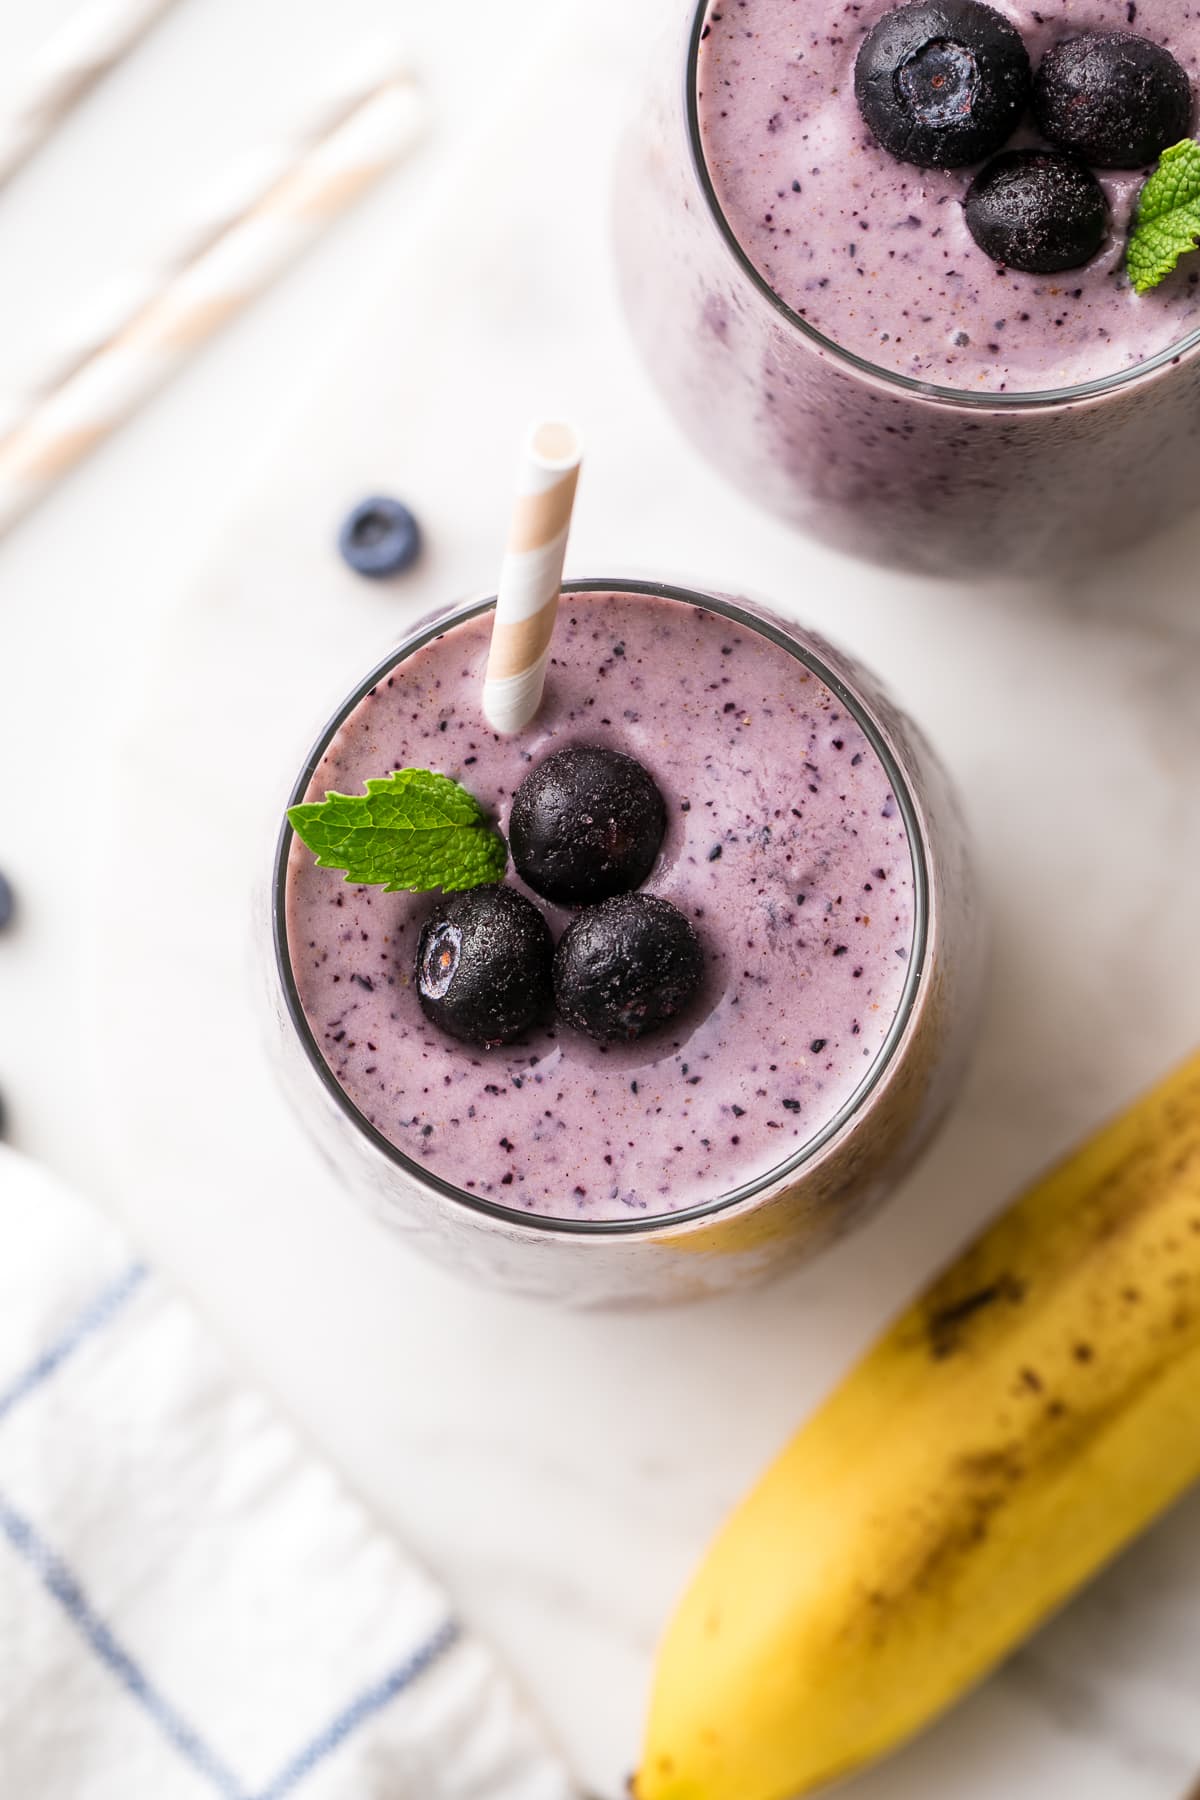 top down view of glass full of blueberry banana smoothie with straw and items surrounding.